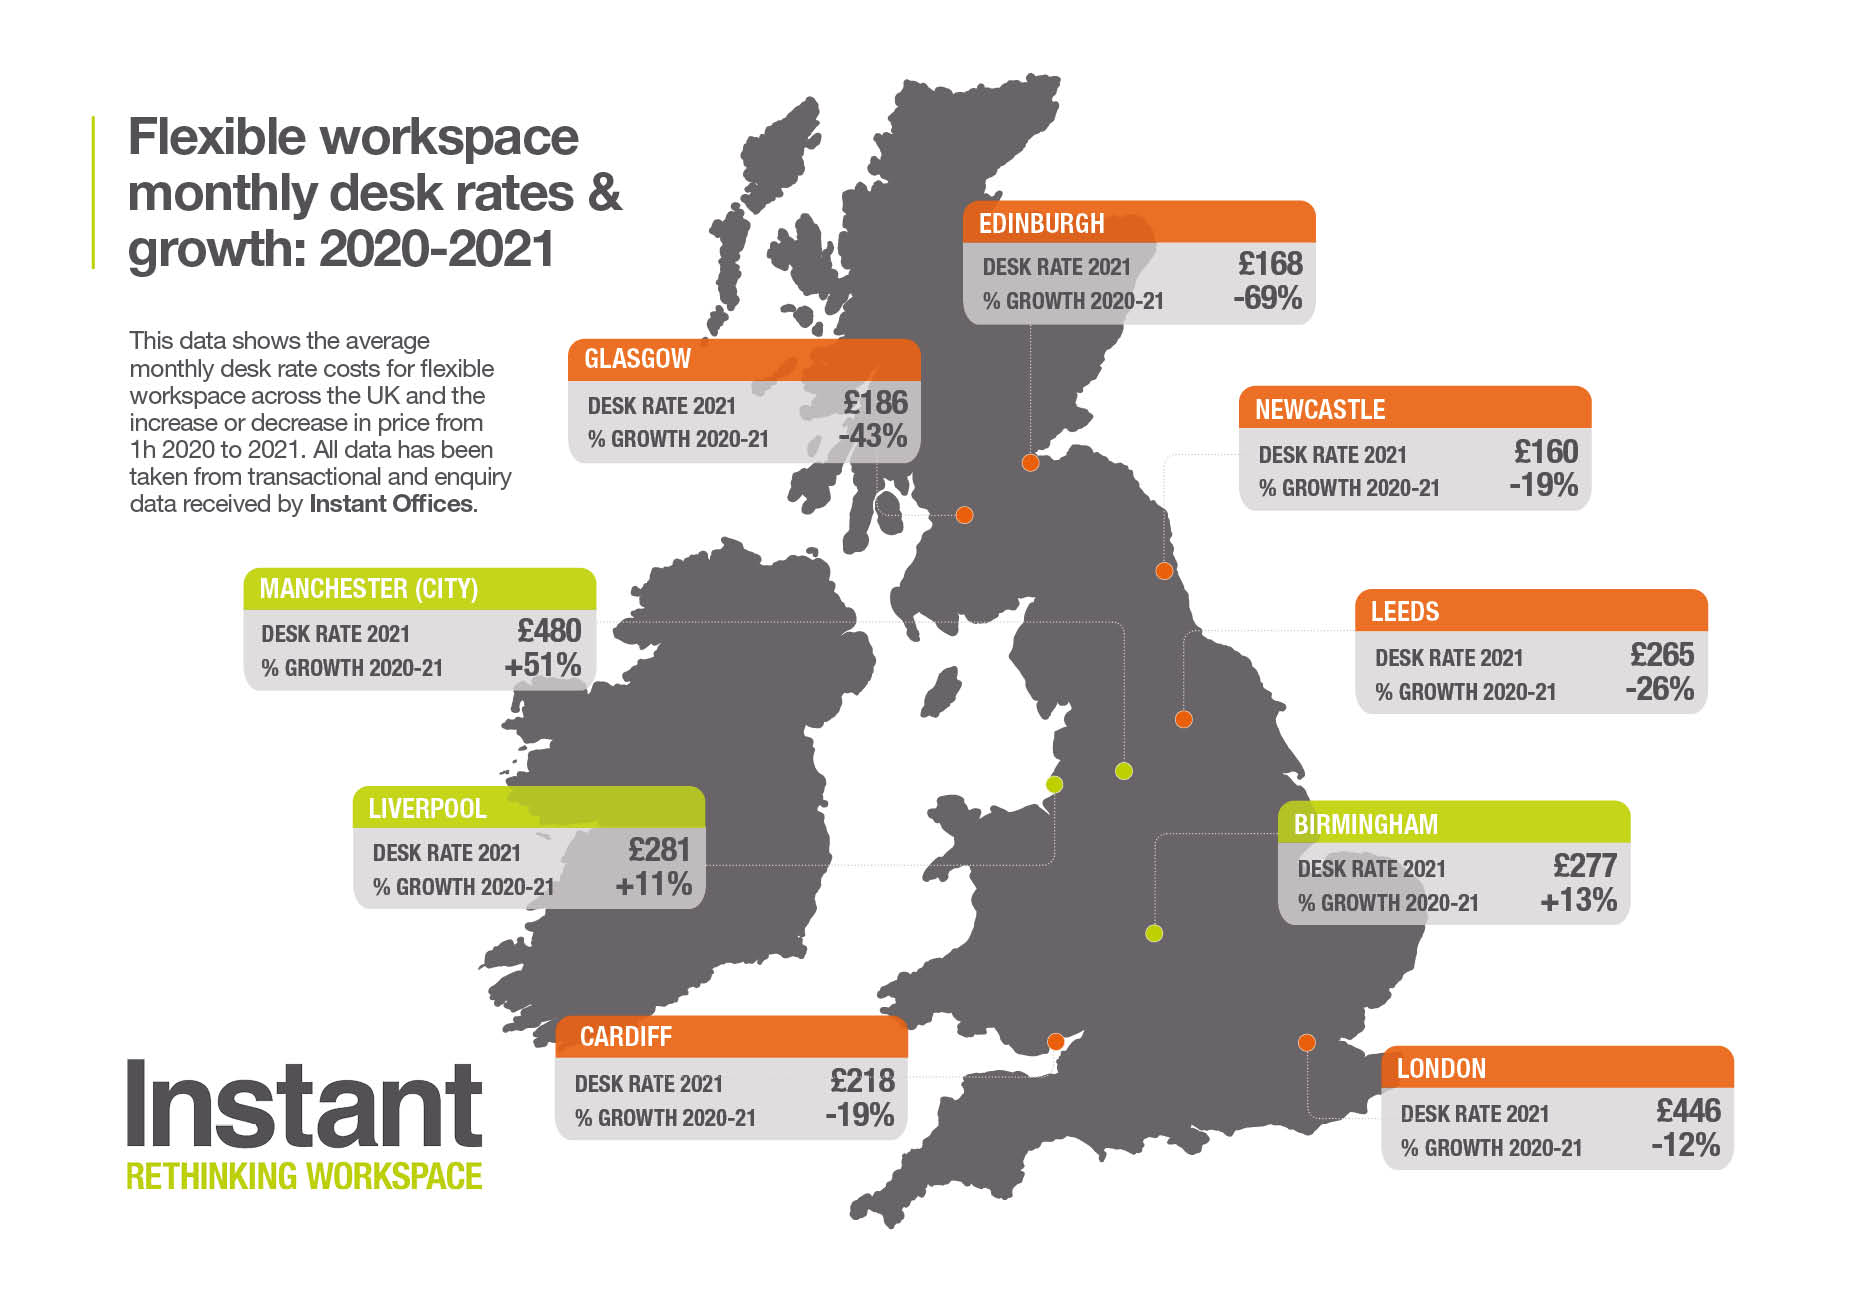 Flexible workspace monthly desk rates UK 2021 the instant group data